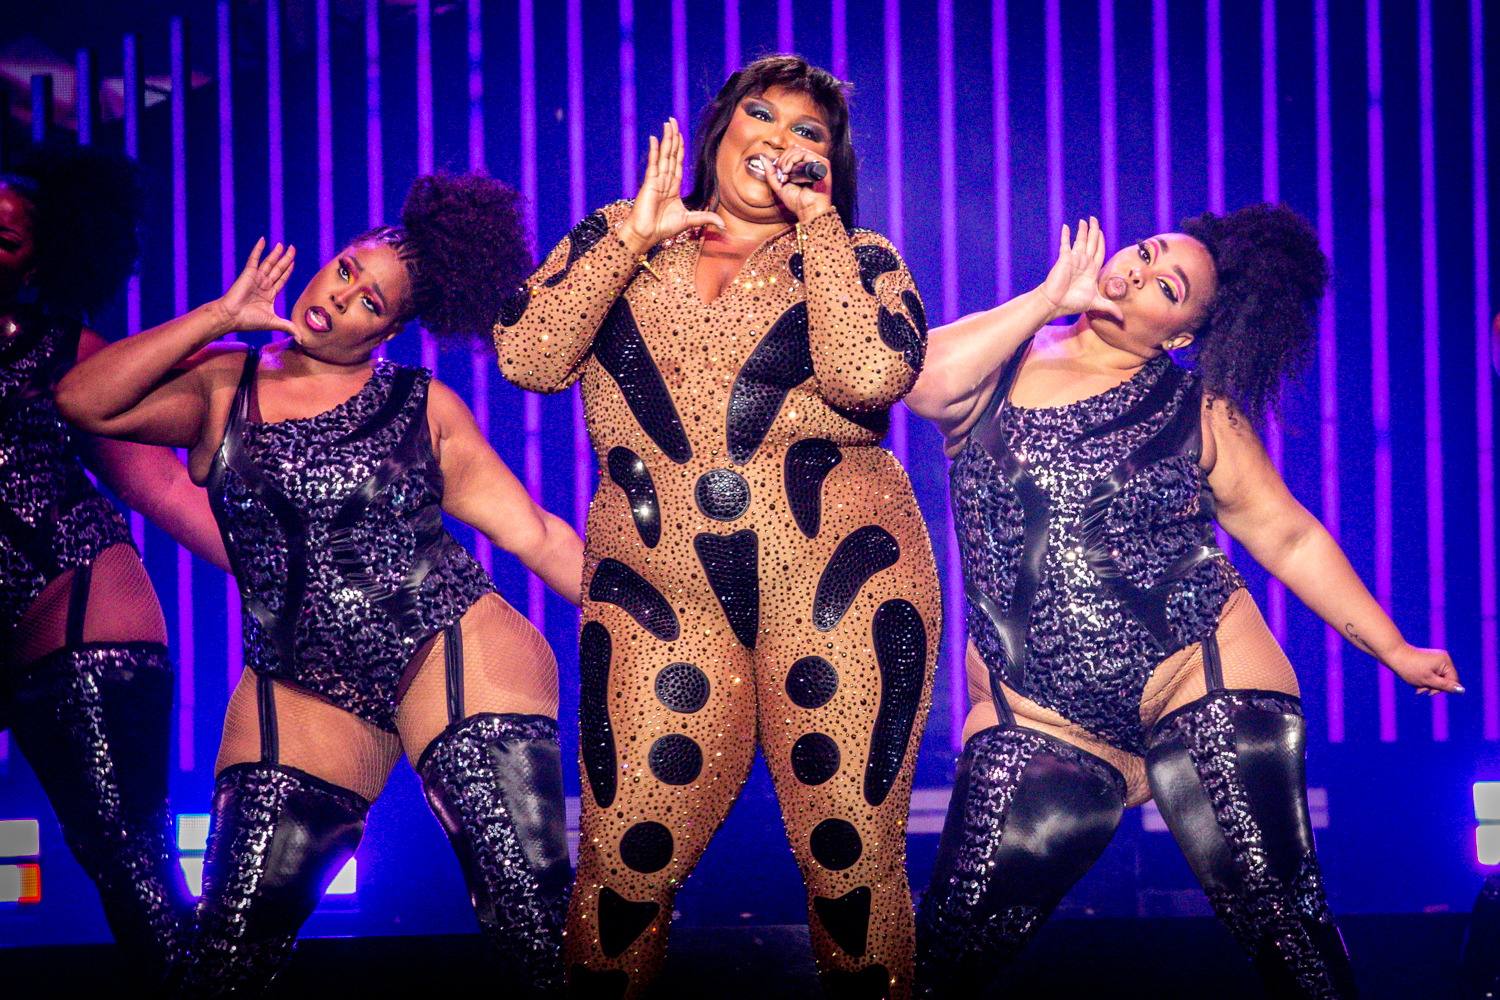 Best Seats for a Lizzo Concert - Your Guide